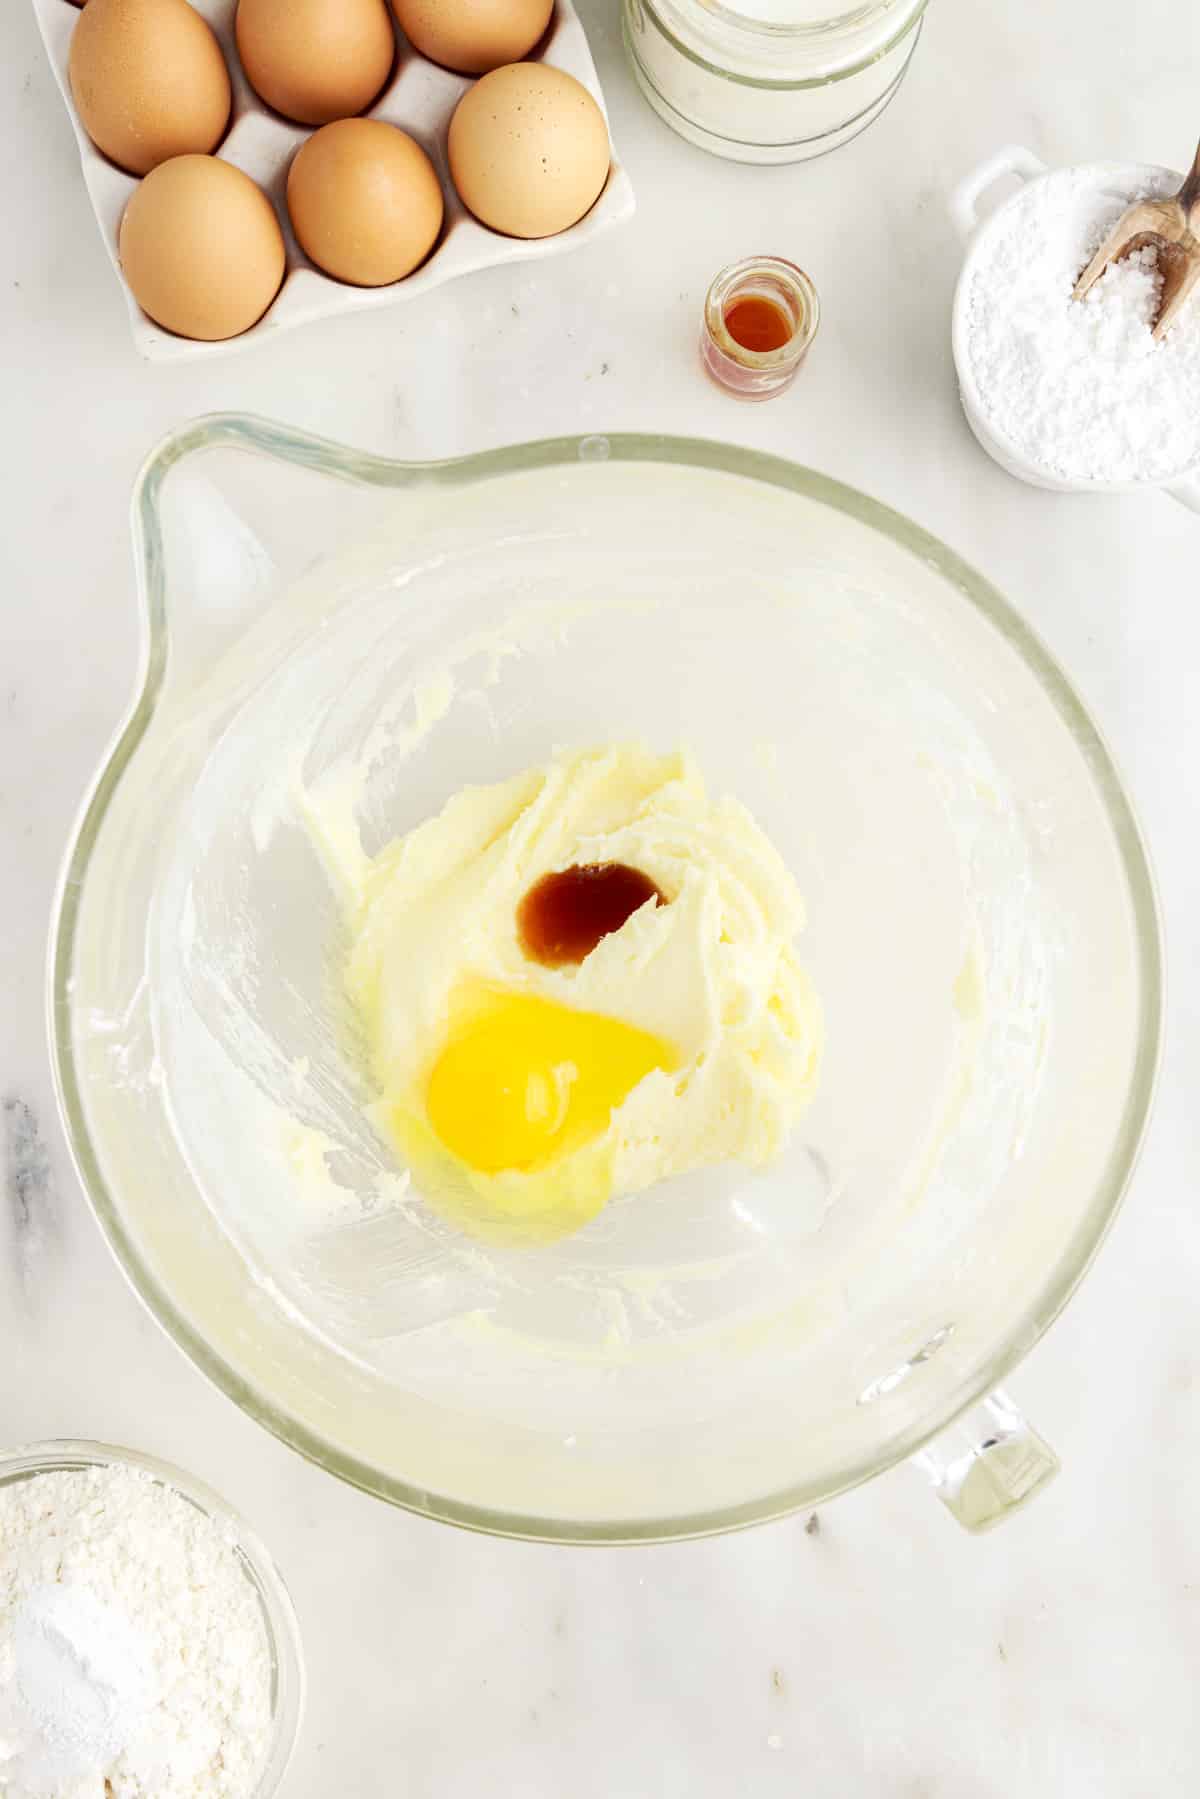 Egg and vanilla added to the cream mixture.